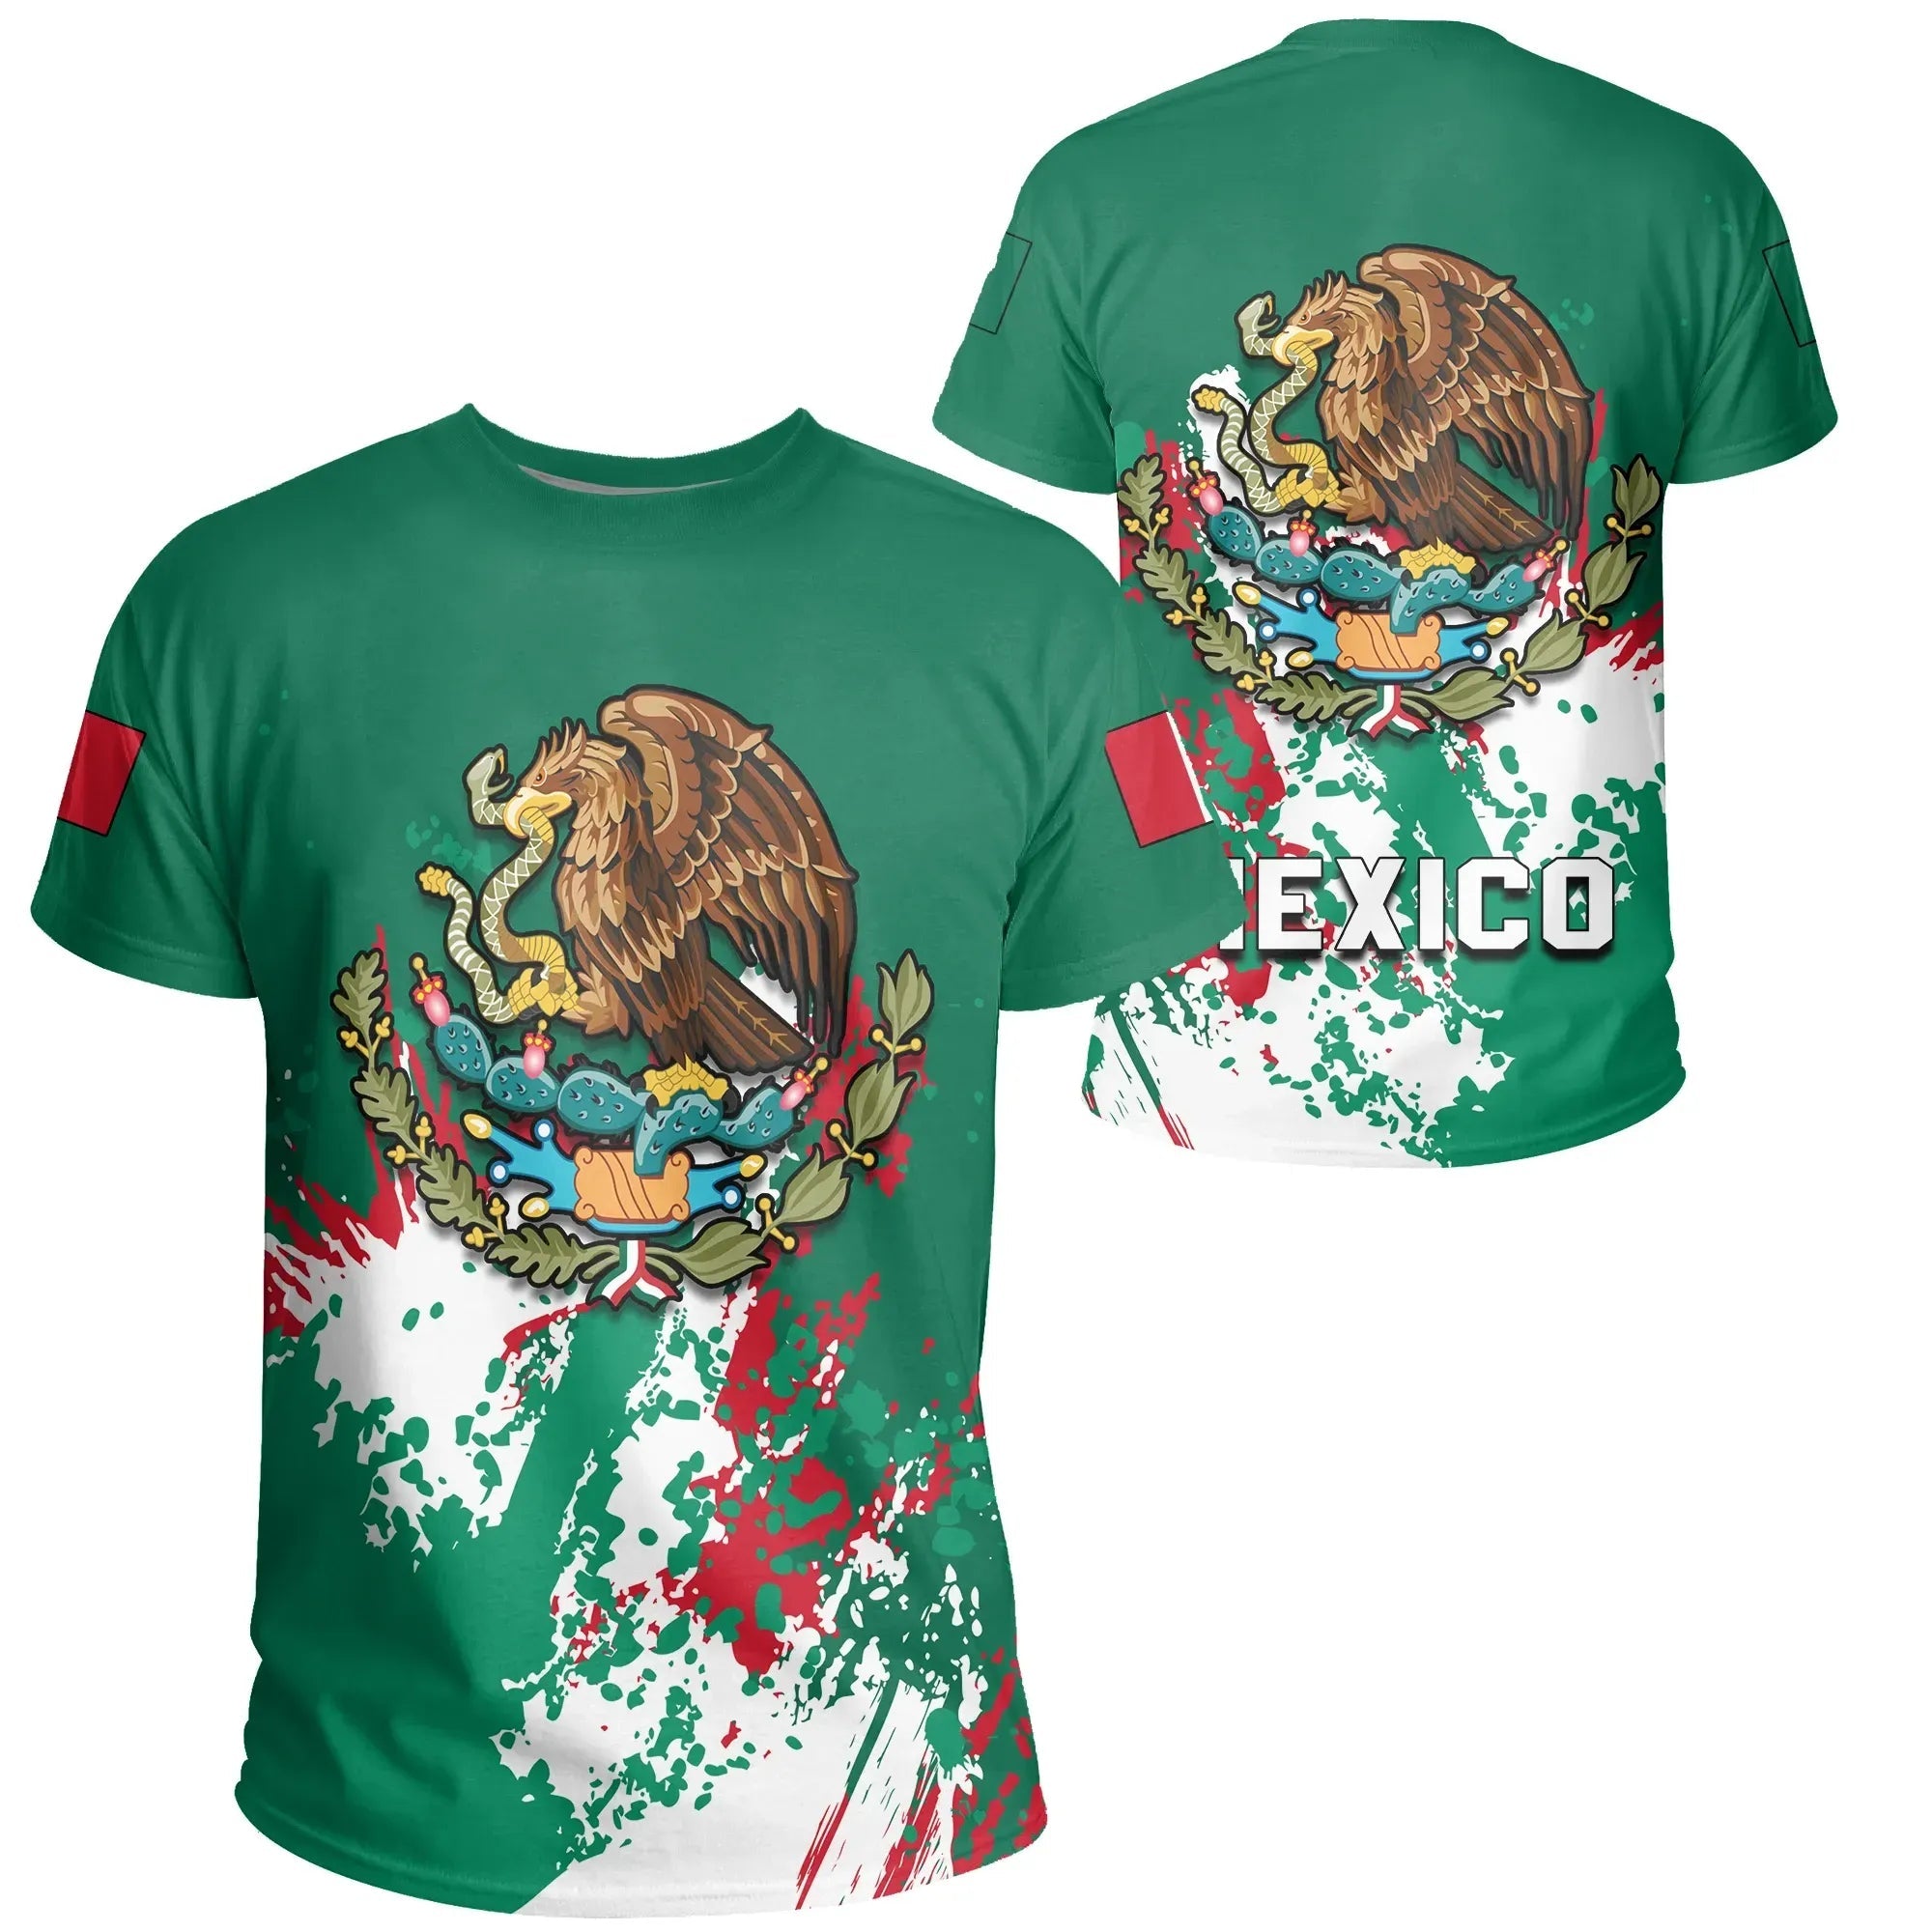 mexico-coat-of-arms-t-shirt-spaint-stylew